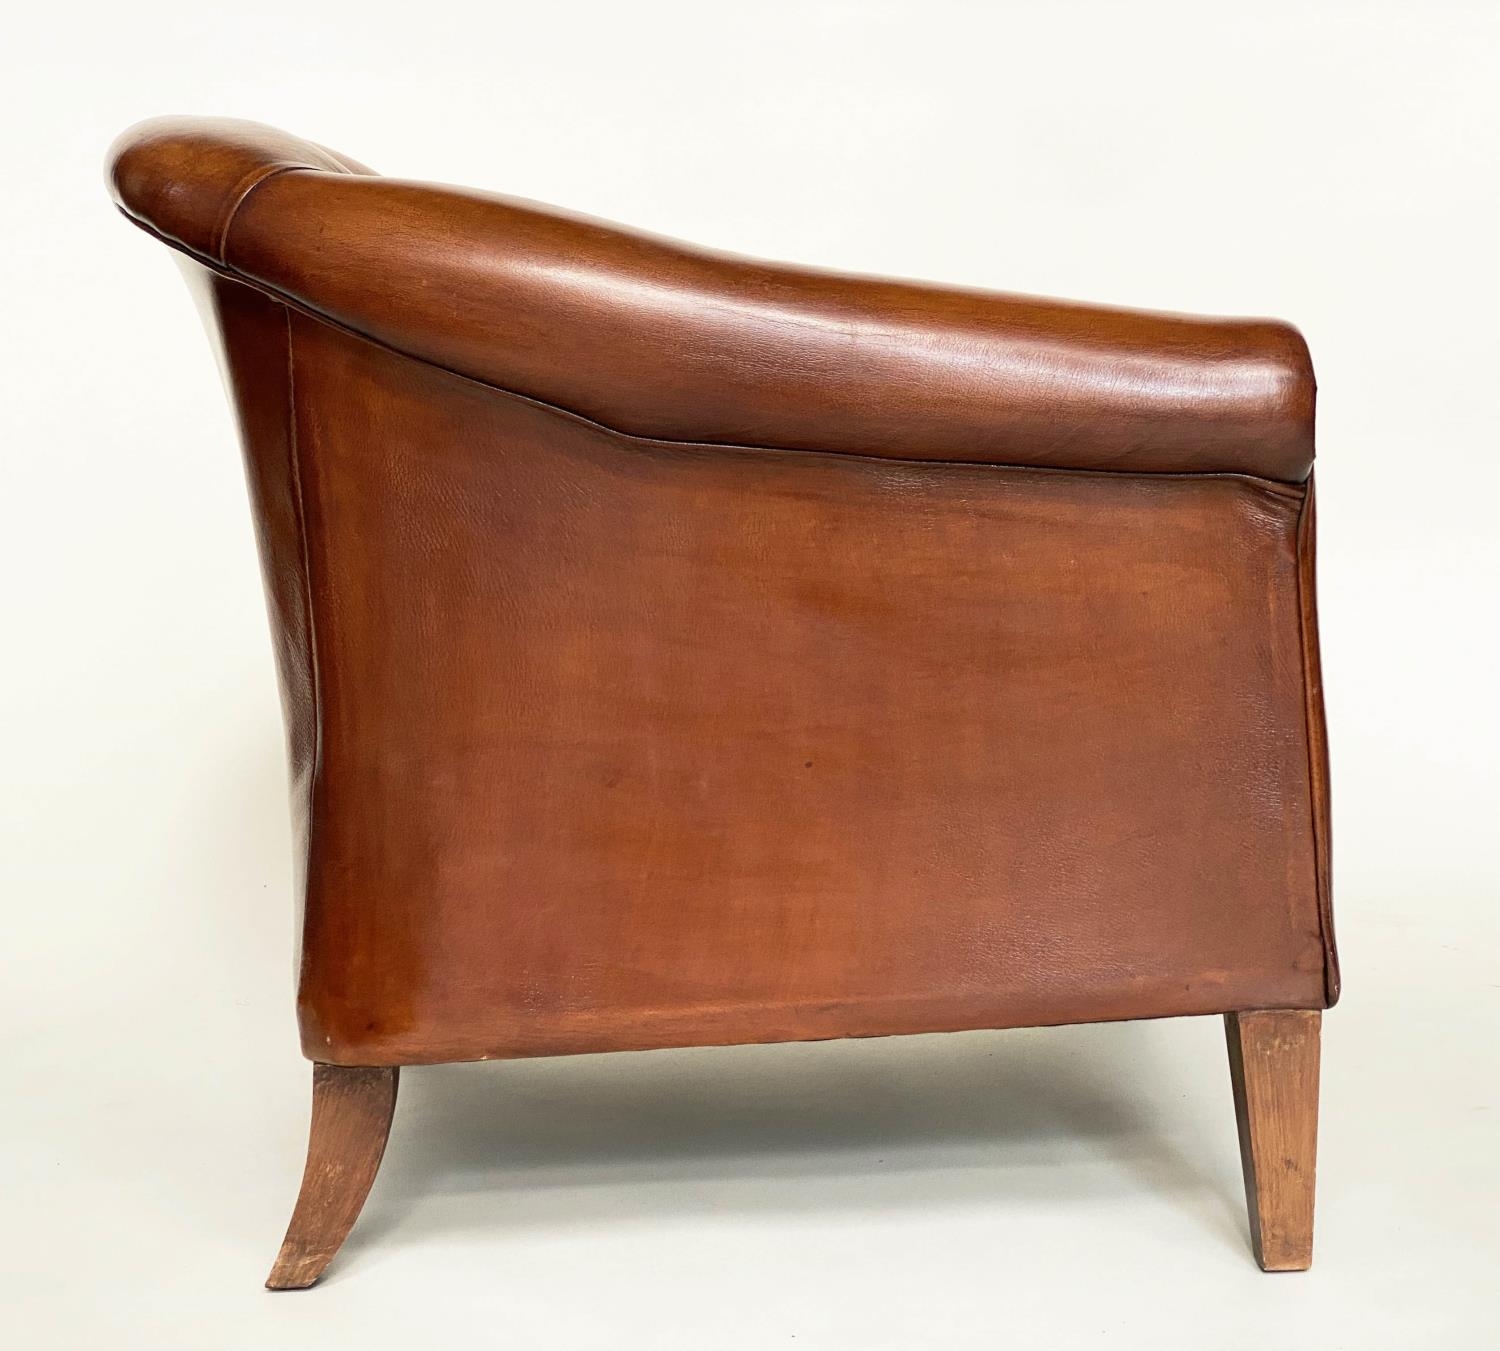 TUB ARMCHAIR BY THOMAS LLOYD, buttoned tan leather with arched back and rounded arms, 78cm W. - Image 4 of 6